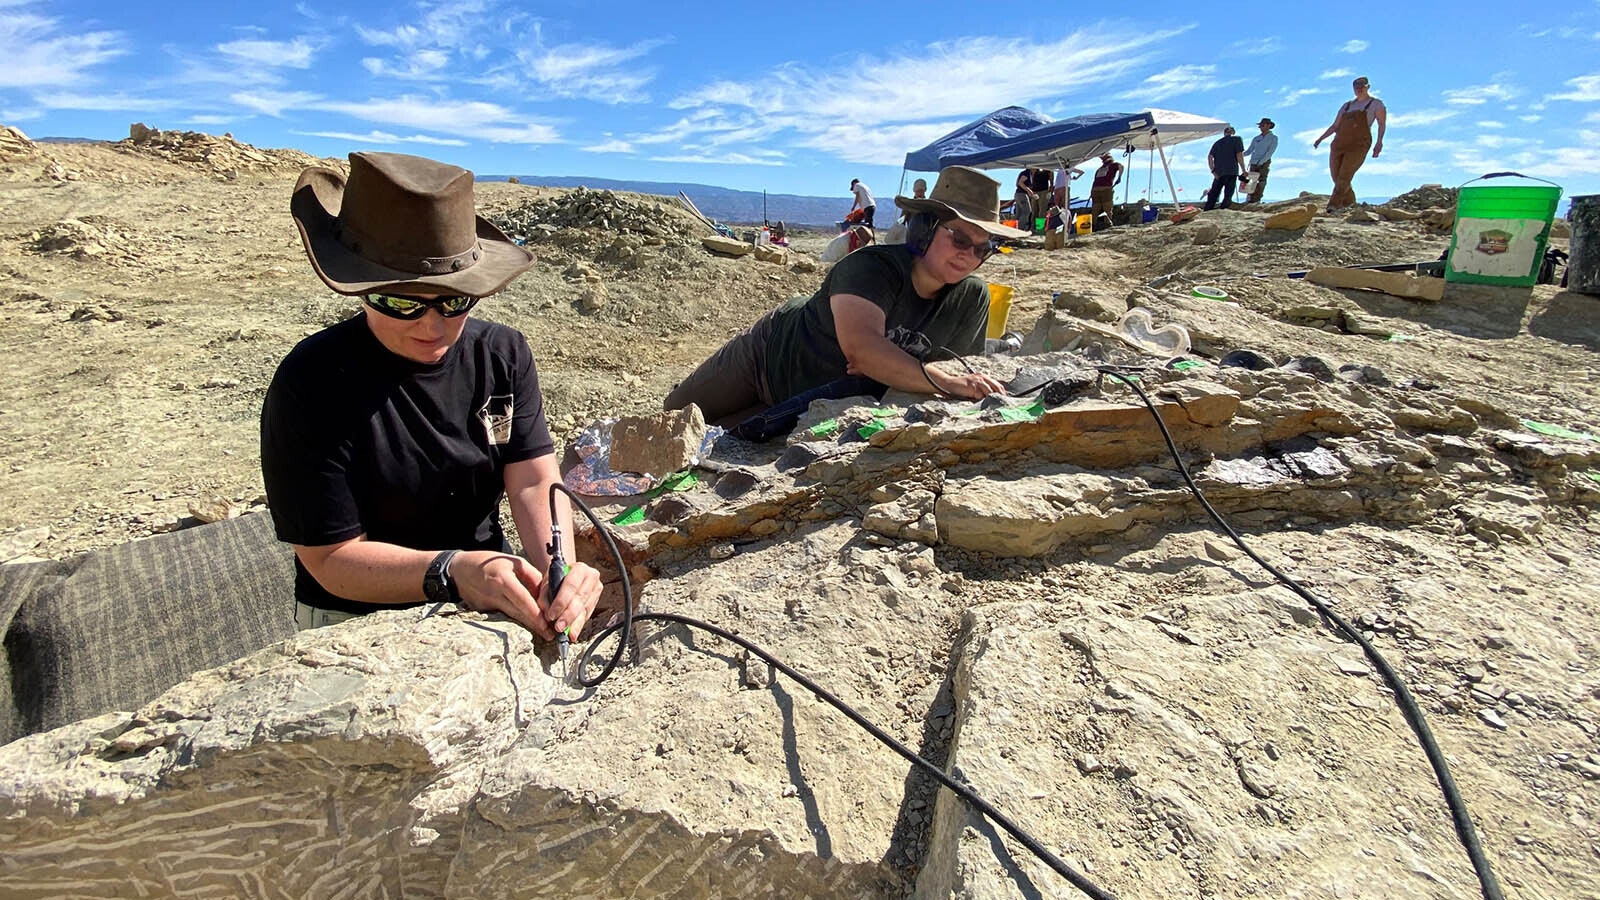 A team from The Children's Museum of Indianapolis work an excavation in Wyoming's famous Jurassic Mile to unearth a rare skeleton of an Allosaurus.